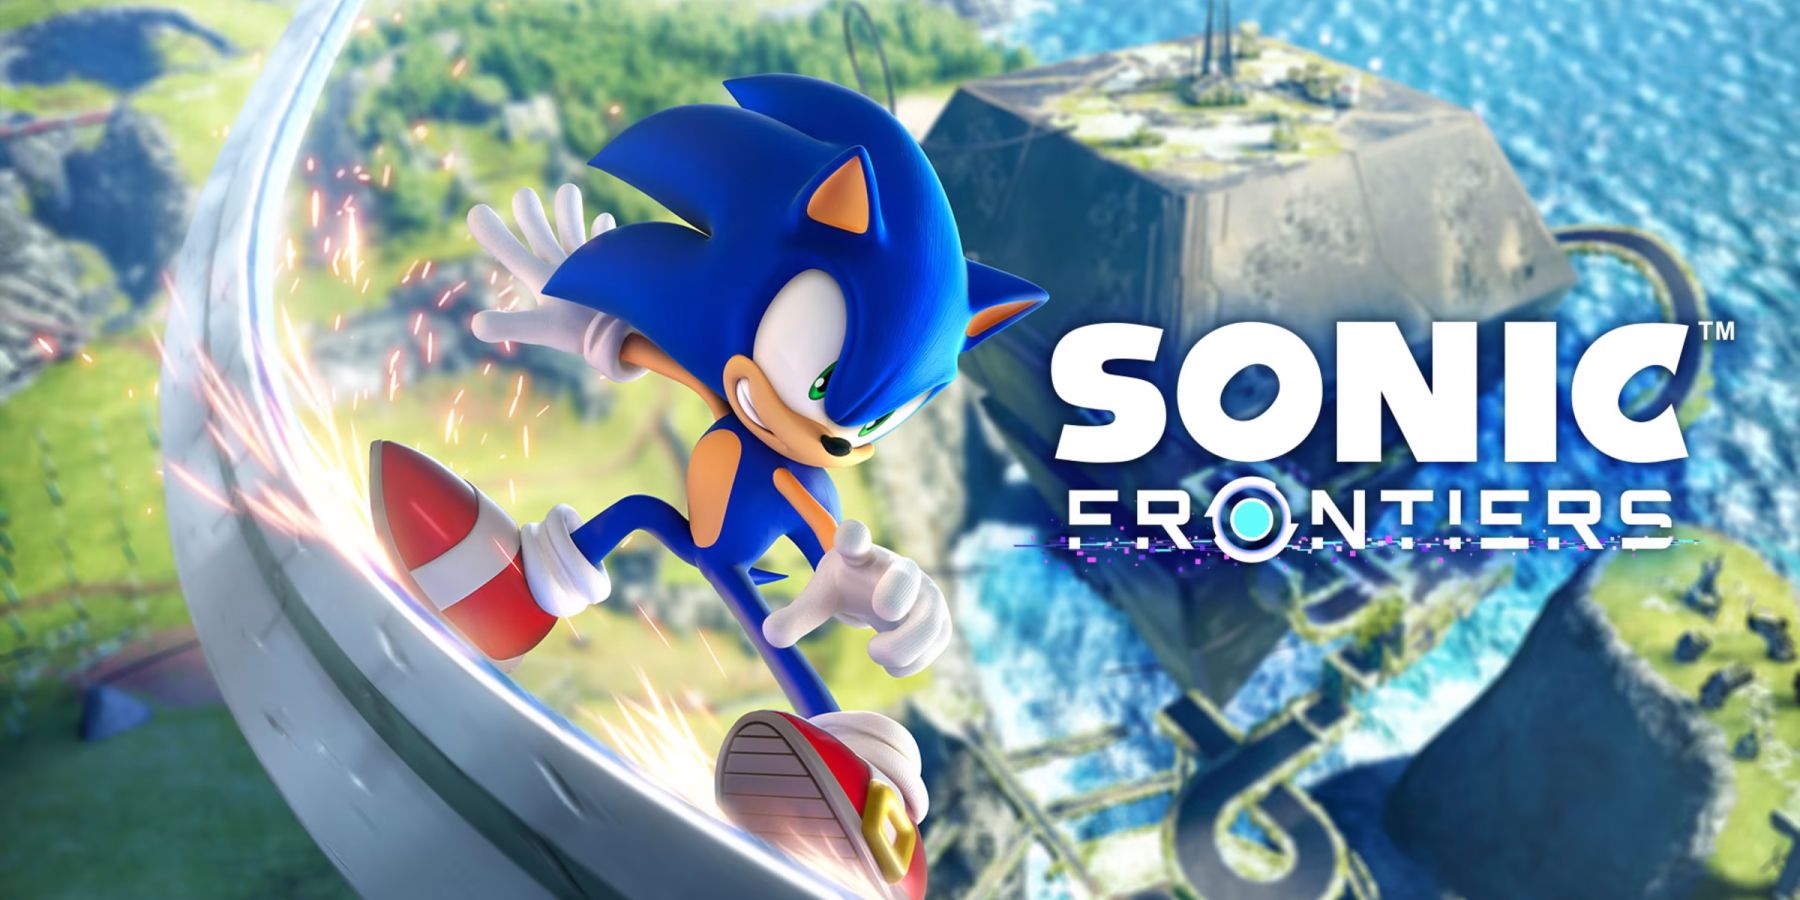 Promotional picture for the release of Sonic Frontiers